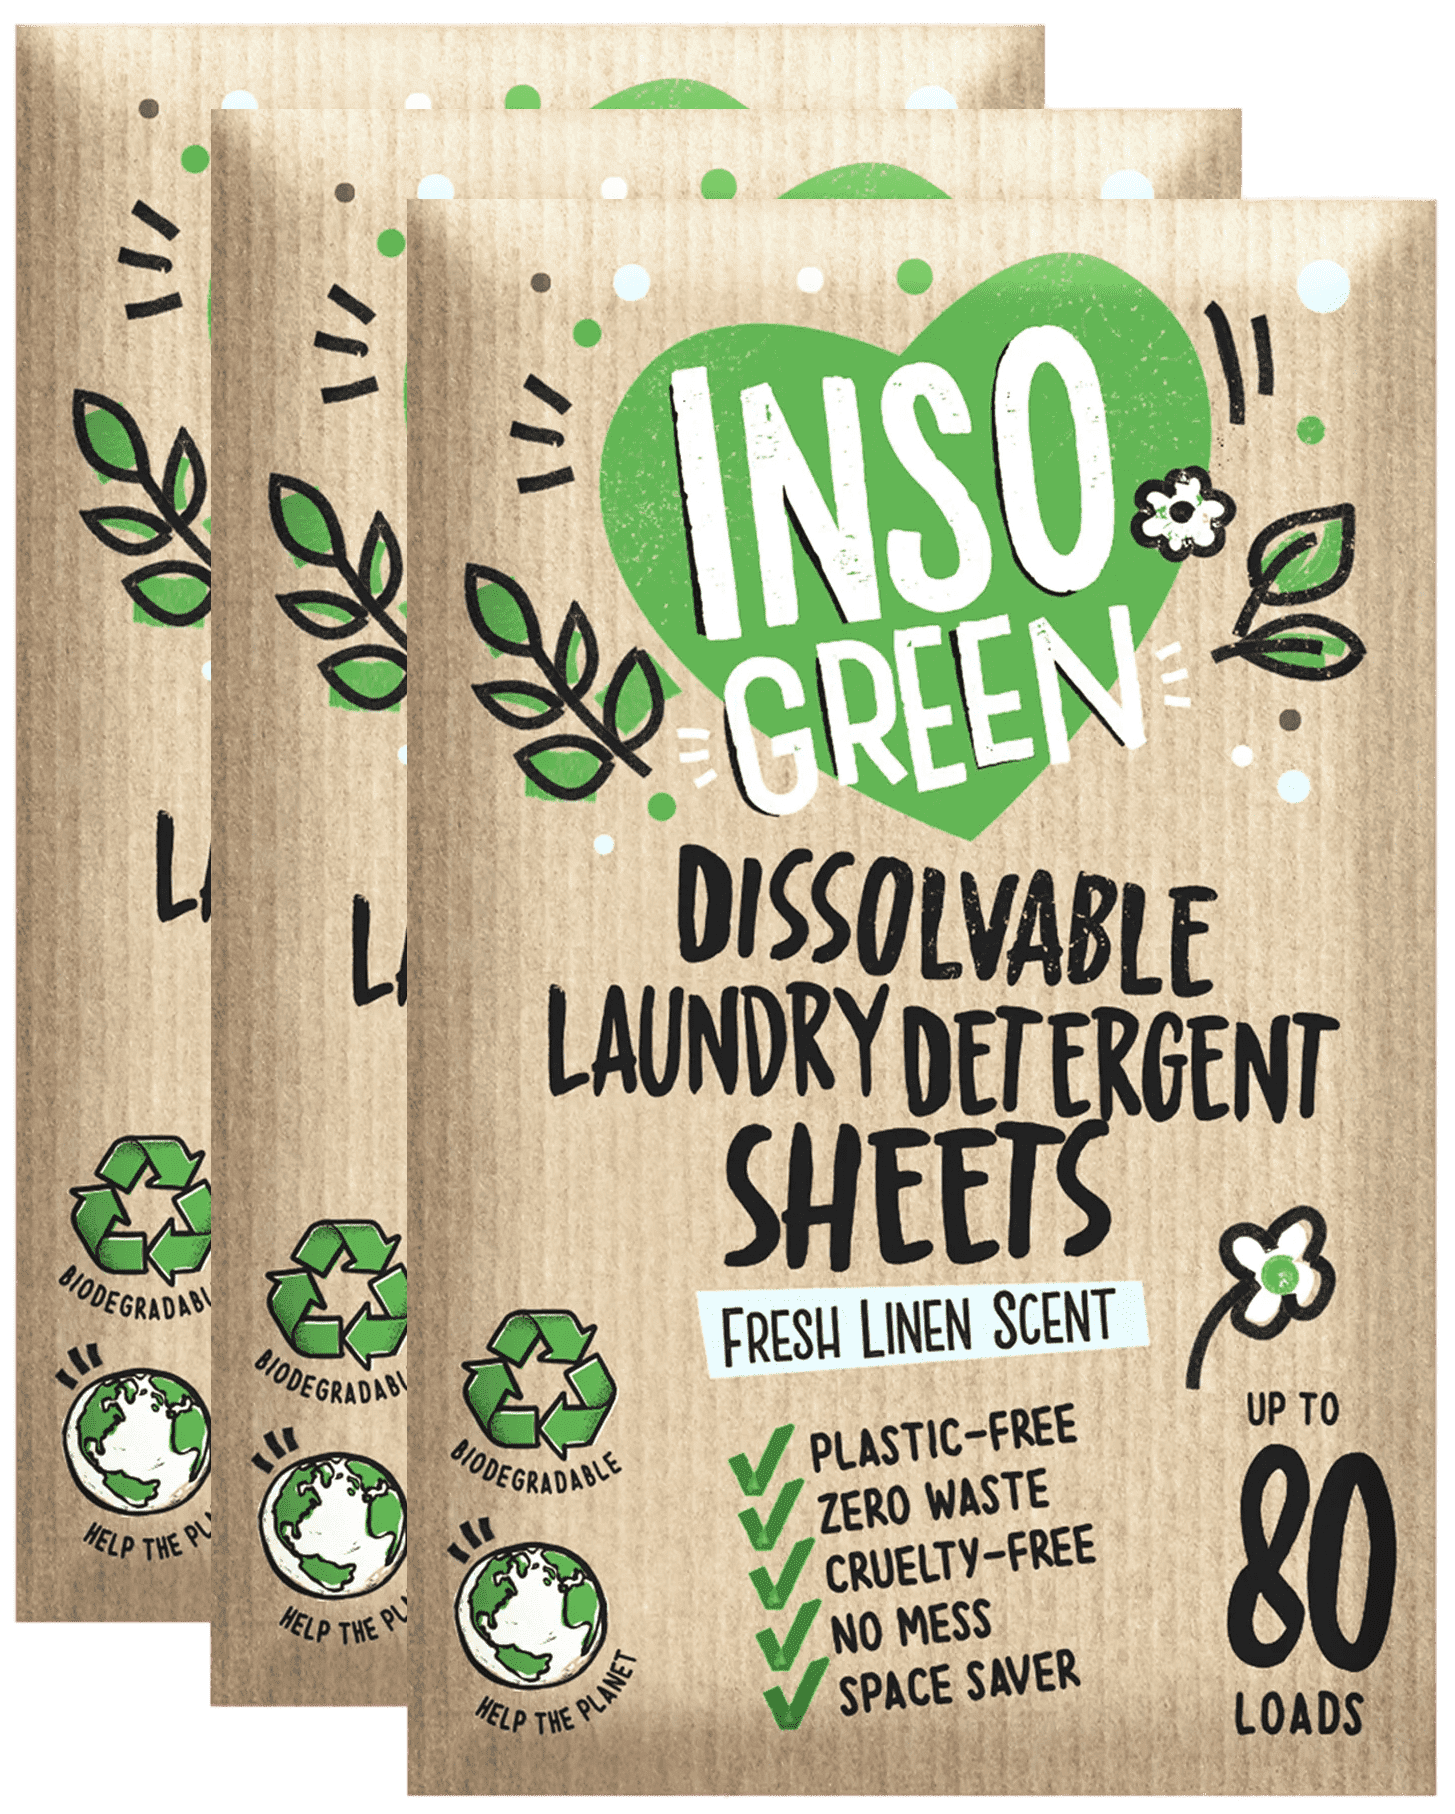 Inso Green Eco Laundry Detergent Sheets 80 Loads Zero Plastic Washer No  Mess